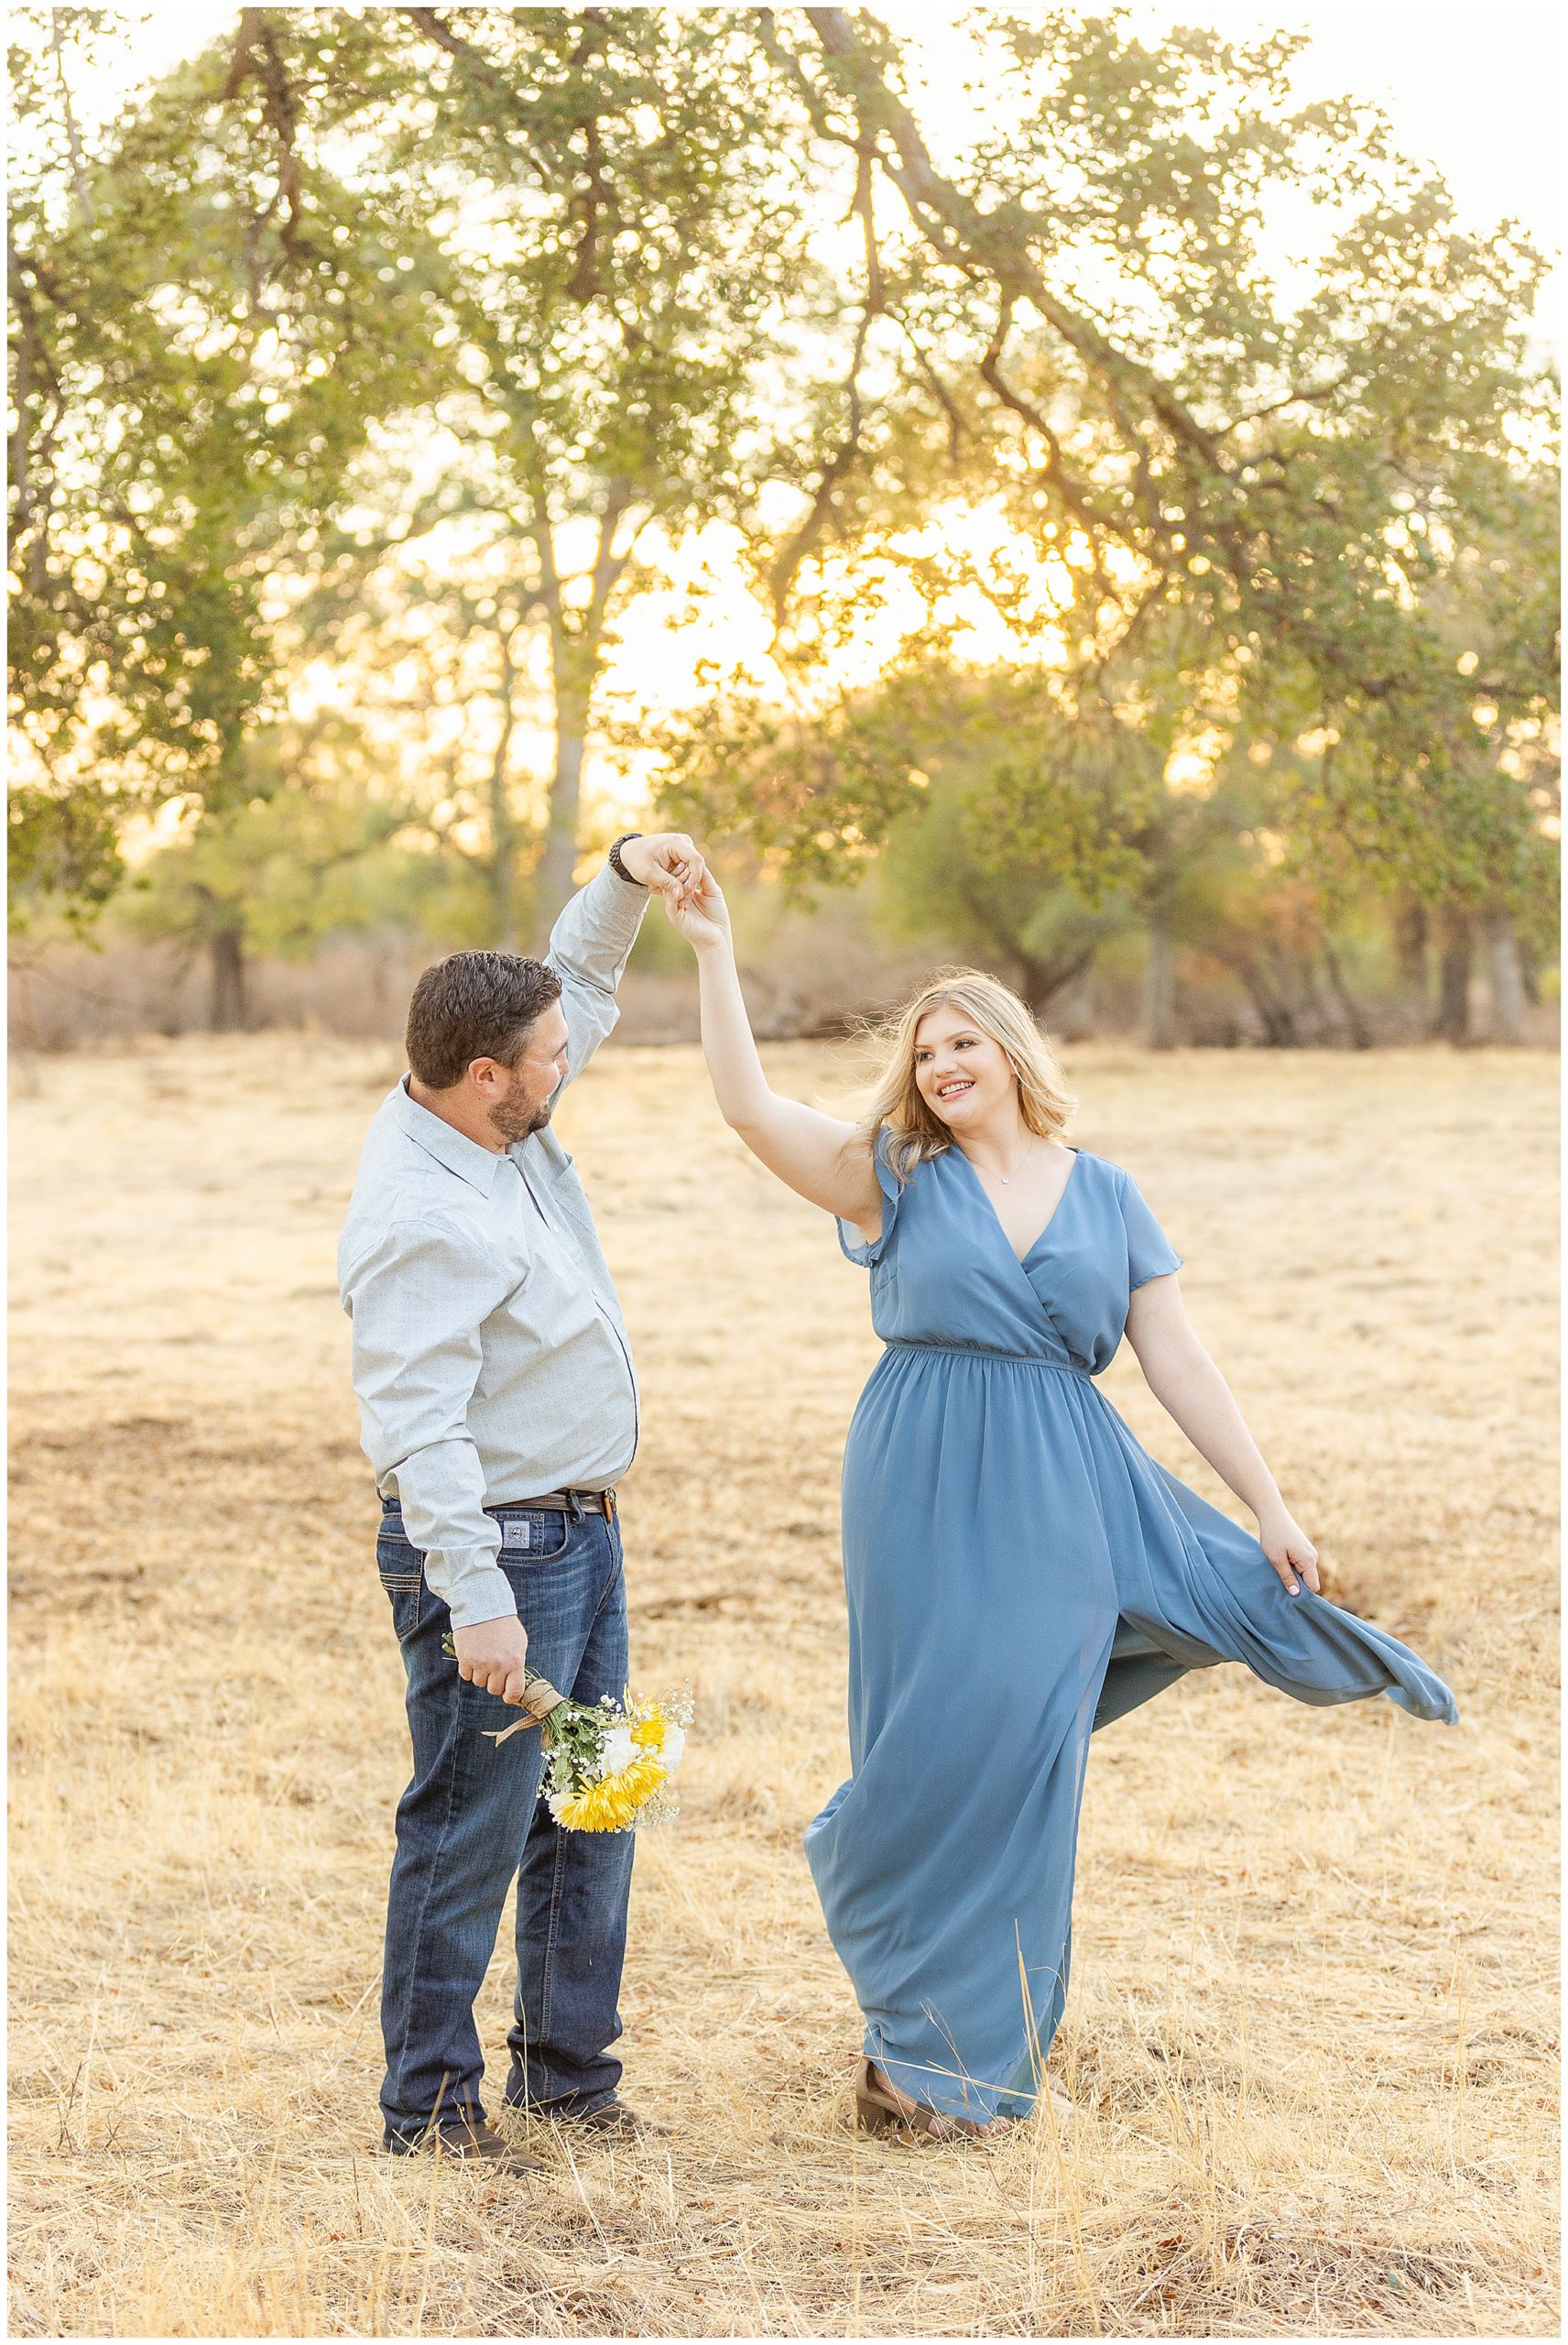 Upper Bidwell Park Engagement Session Chico CA Trail Fall September Yellow Flowers_0006.jpg